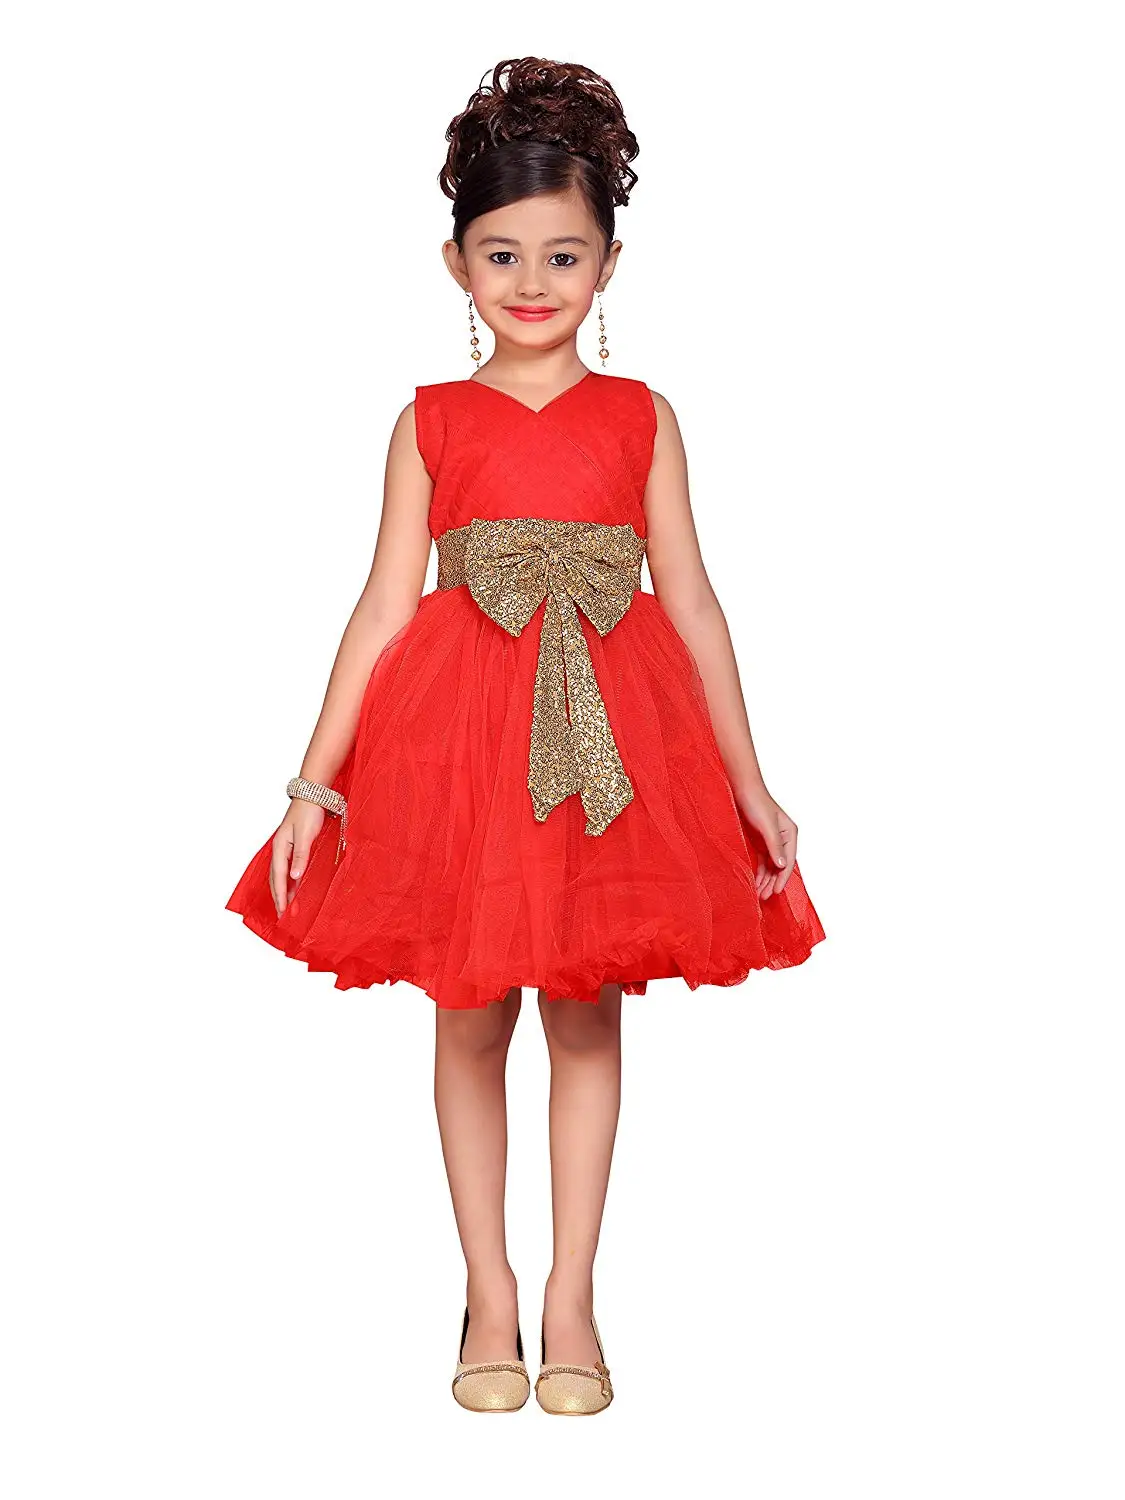 Cheap Child Frock, find Child Frock deals on line at Alibaba.com